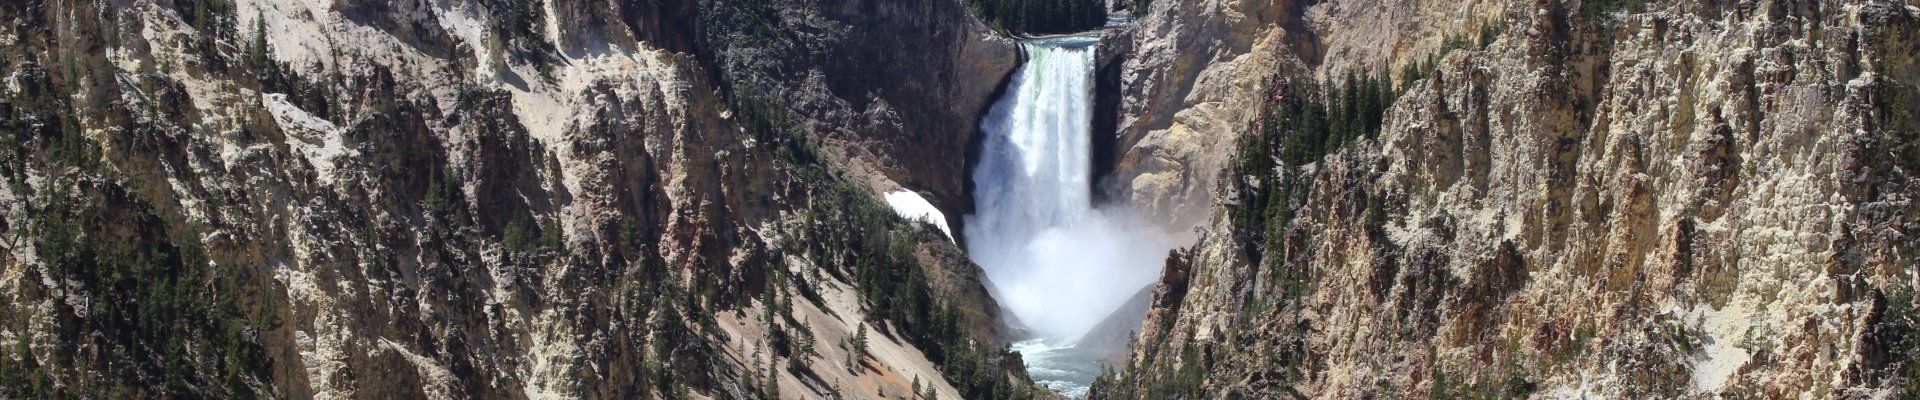 View of the majestic 309 foot Lower Falls at the Grand Canyon of the Yellowstone